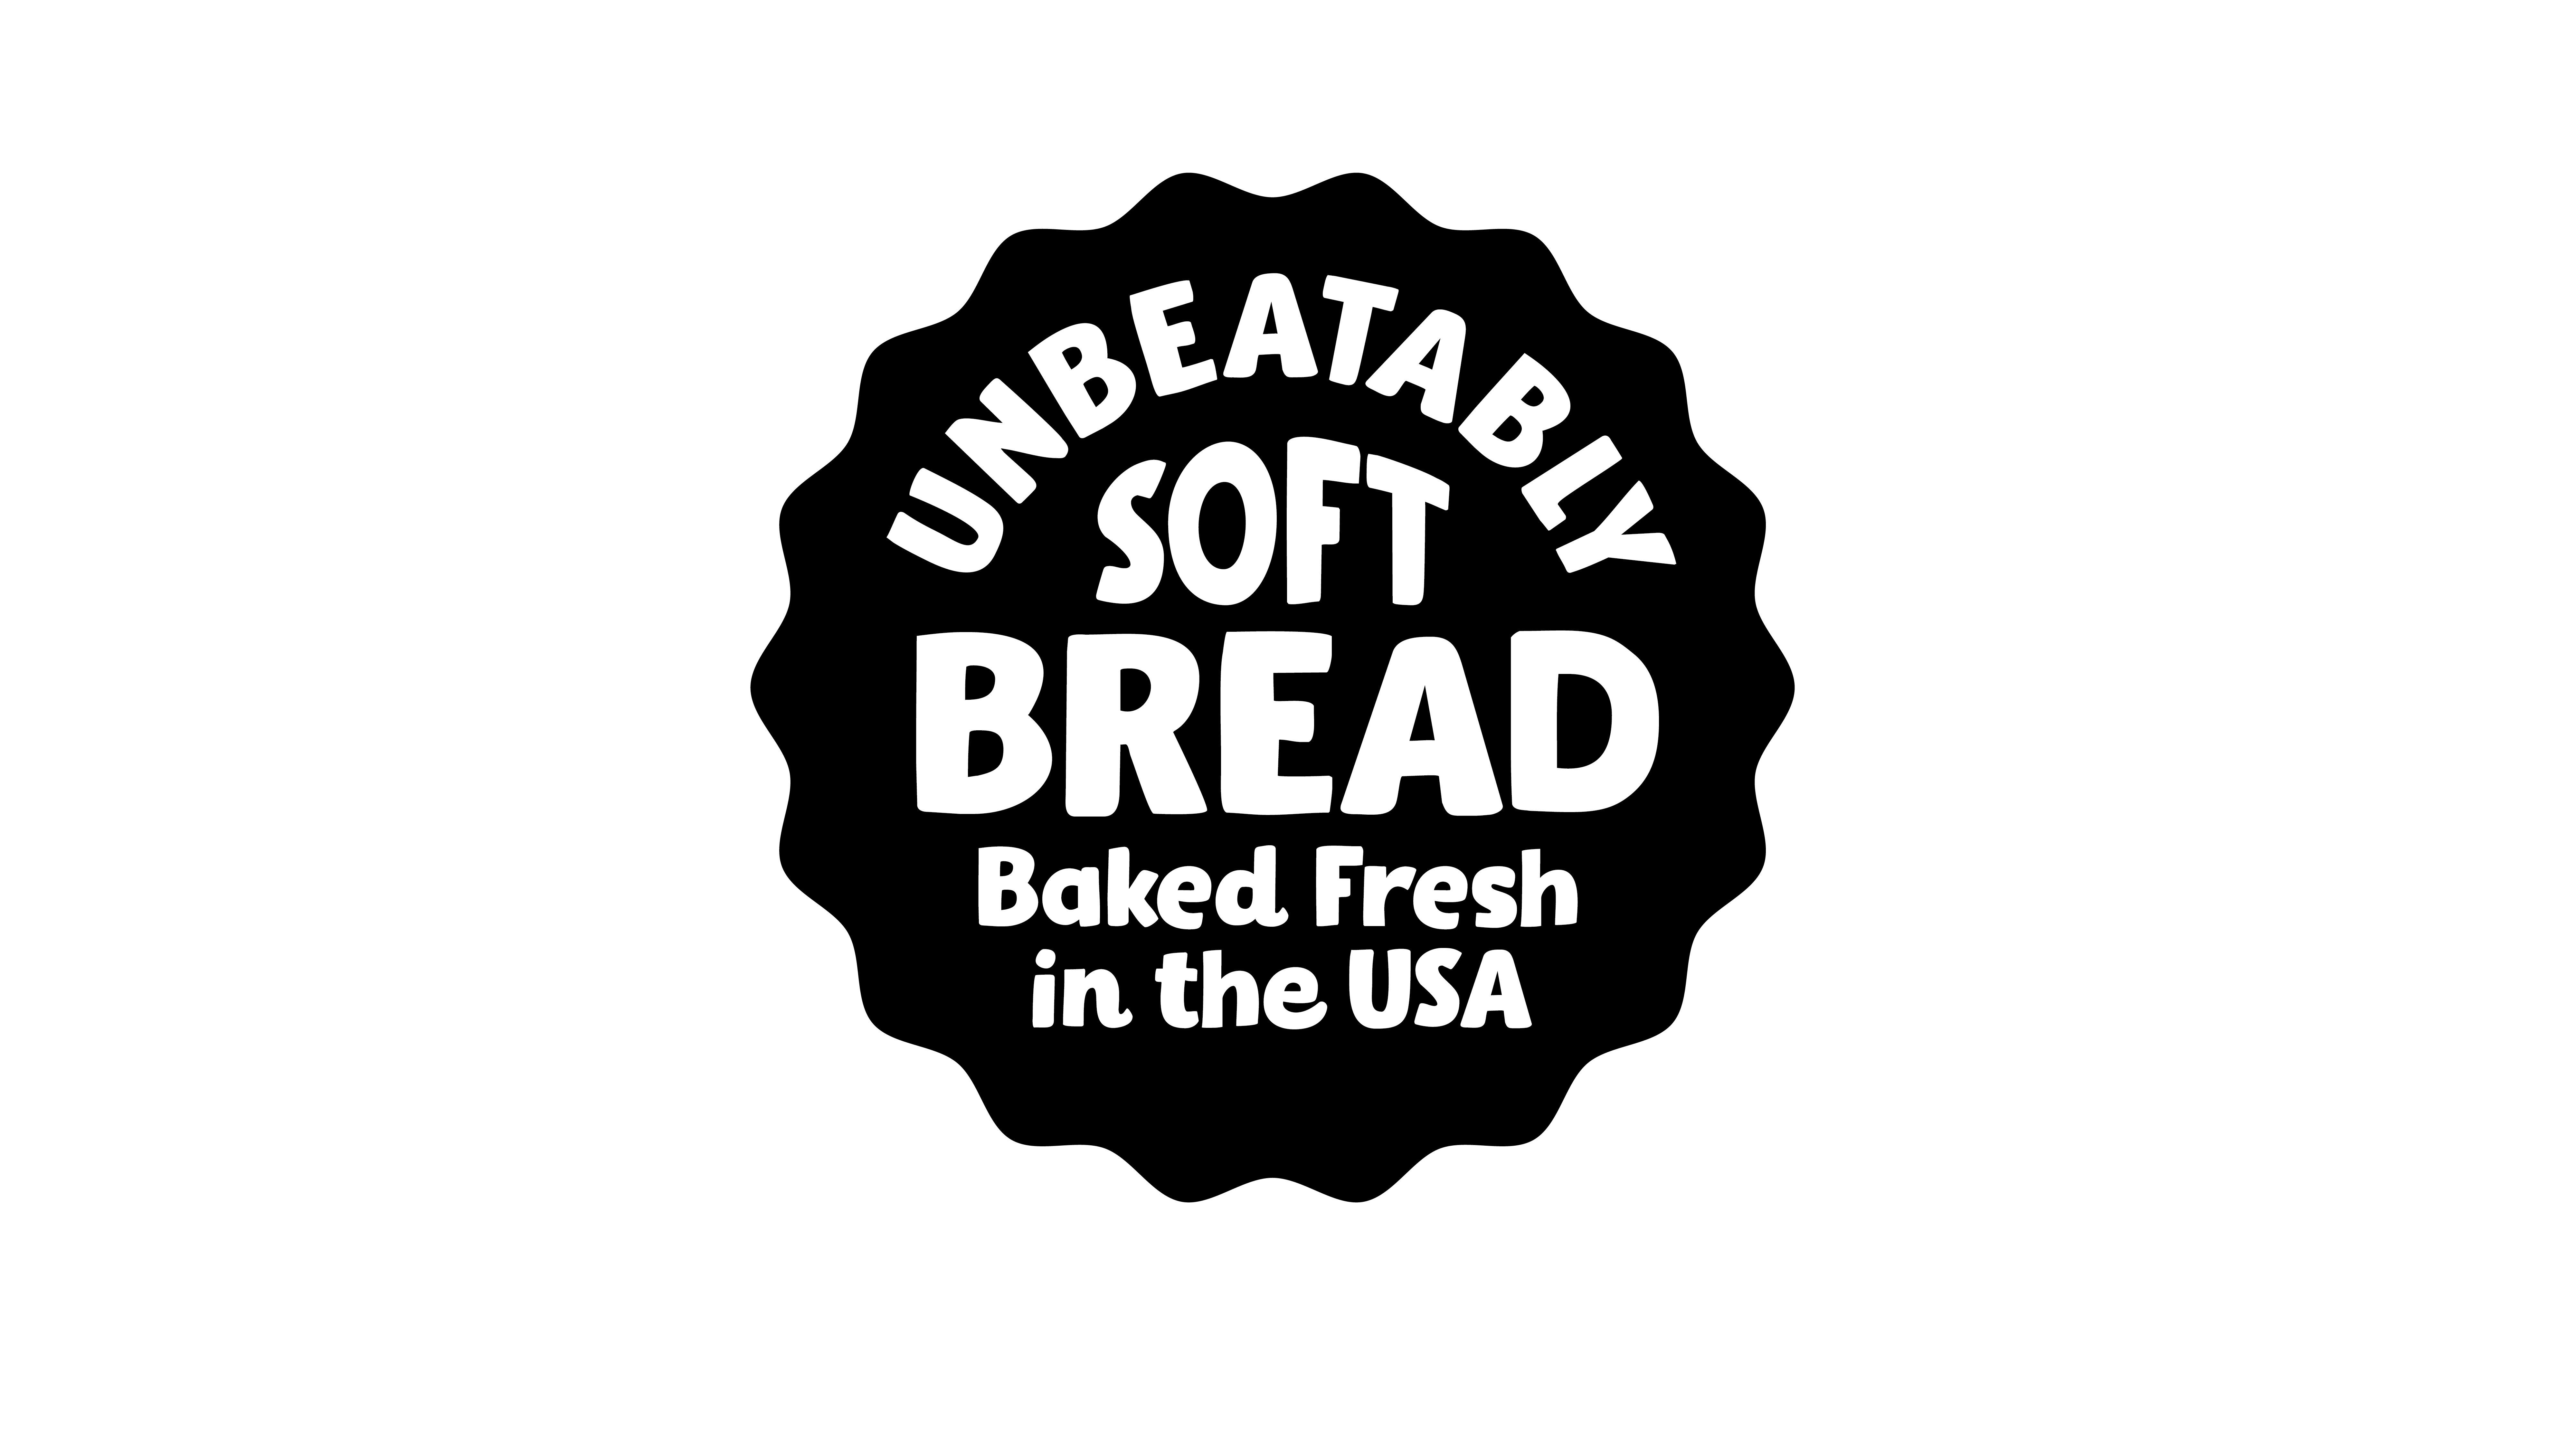  UNBEATABLY SOFT BREAD BAKED FRESH IN THE USA